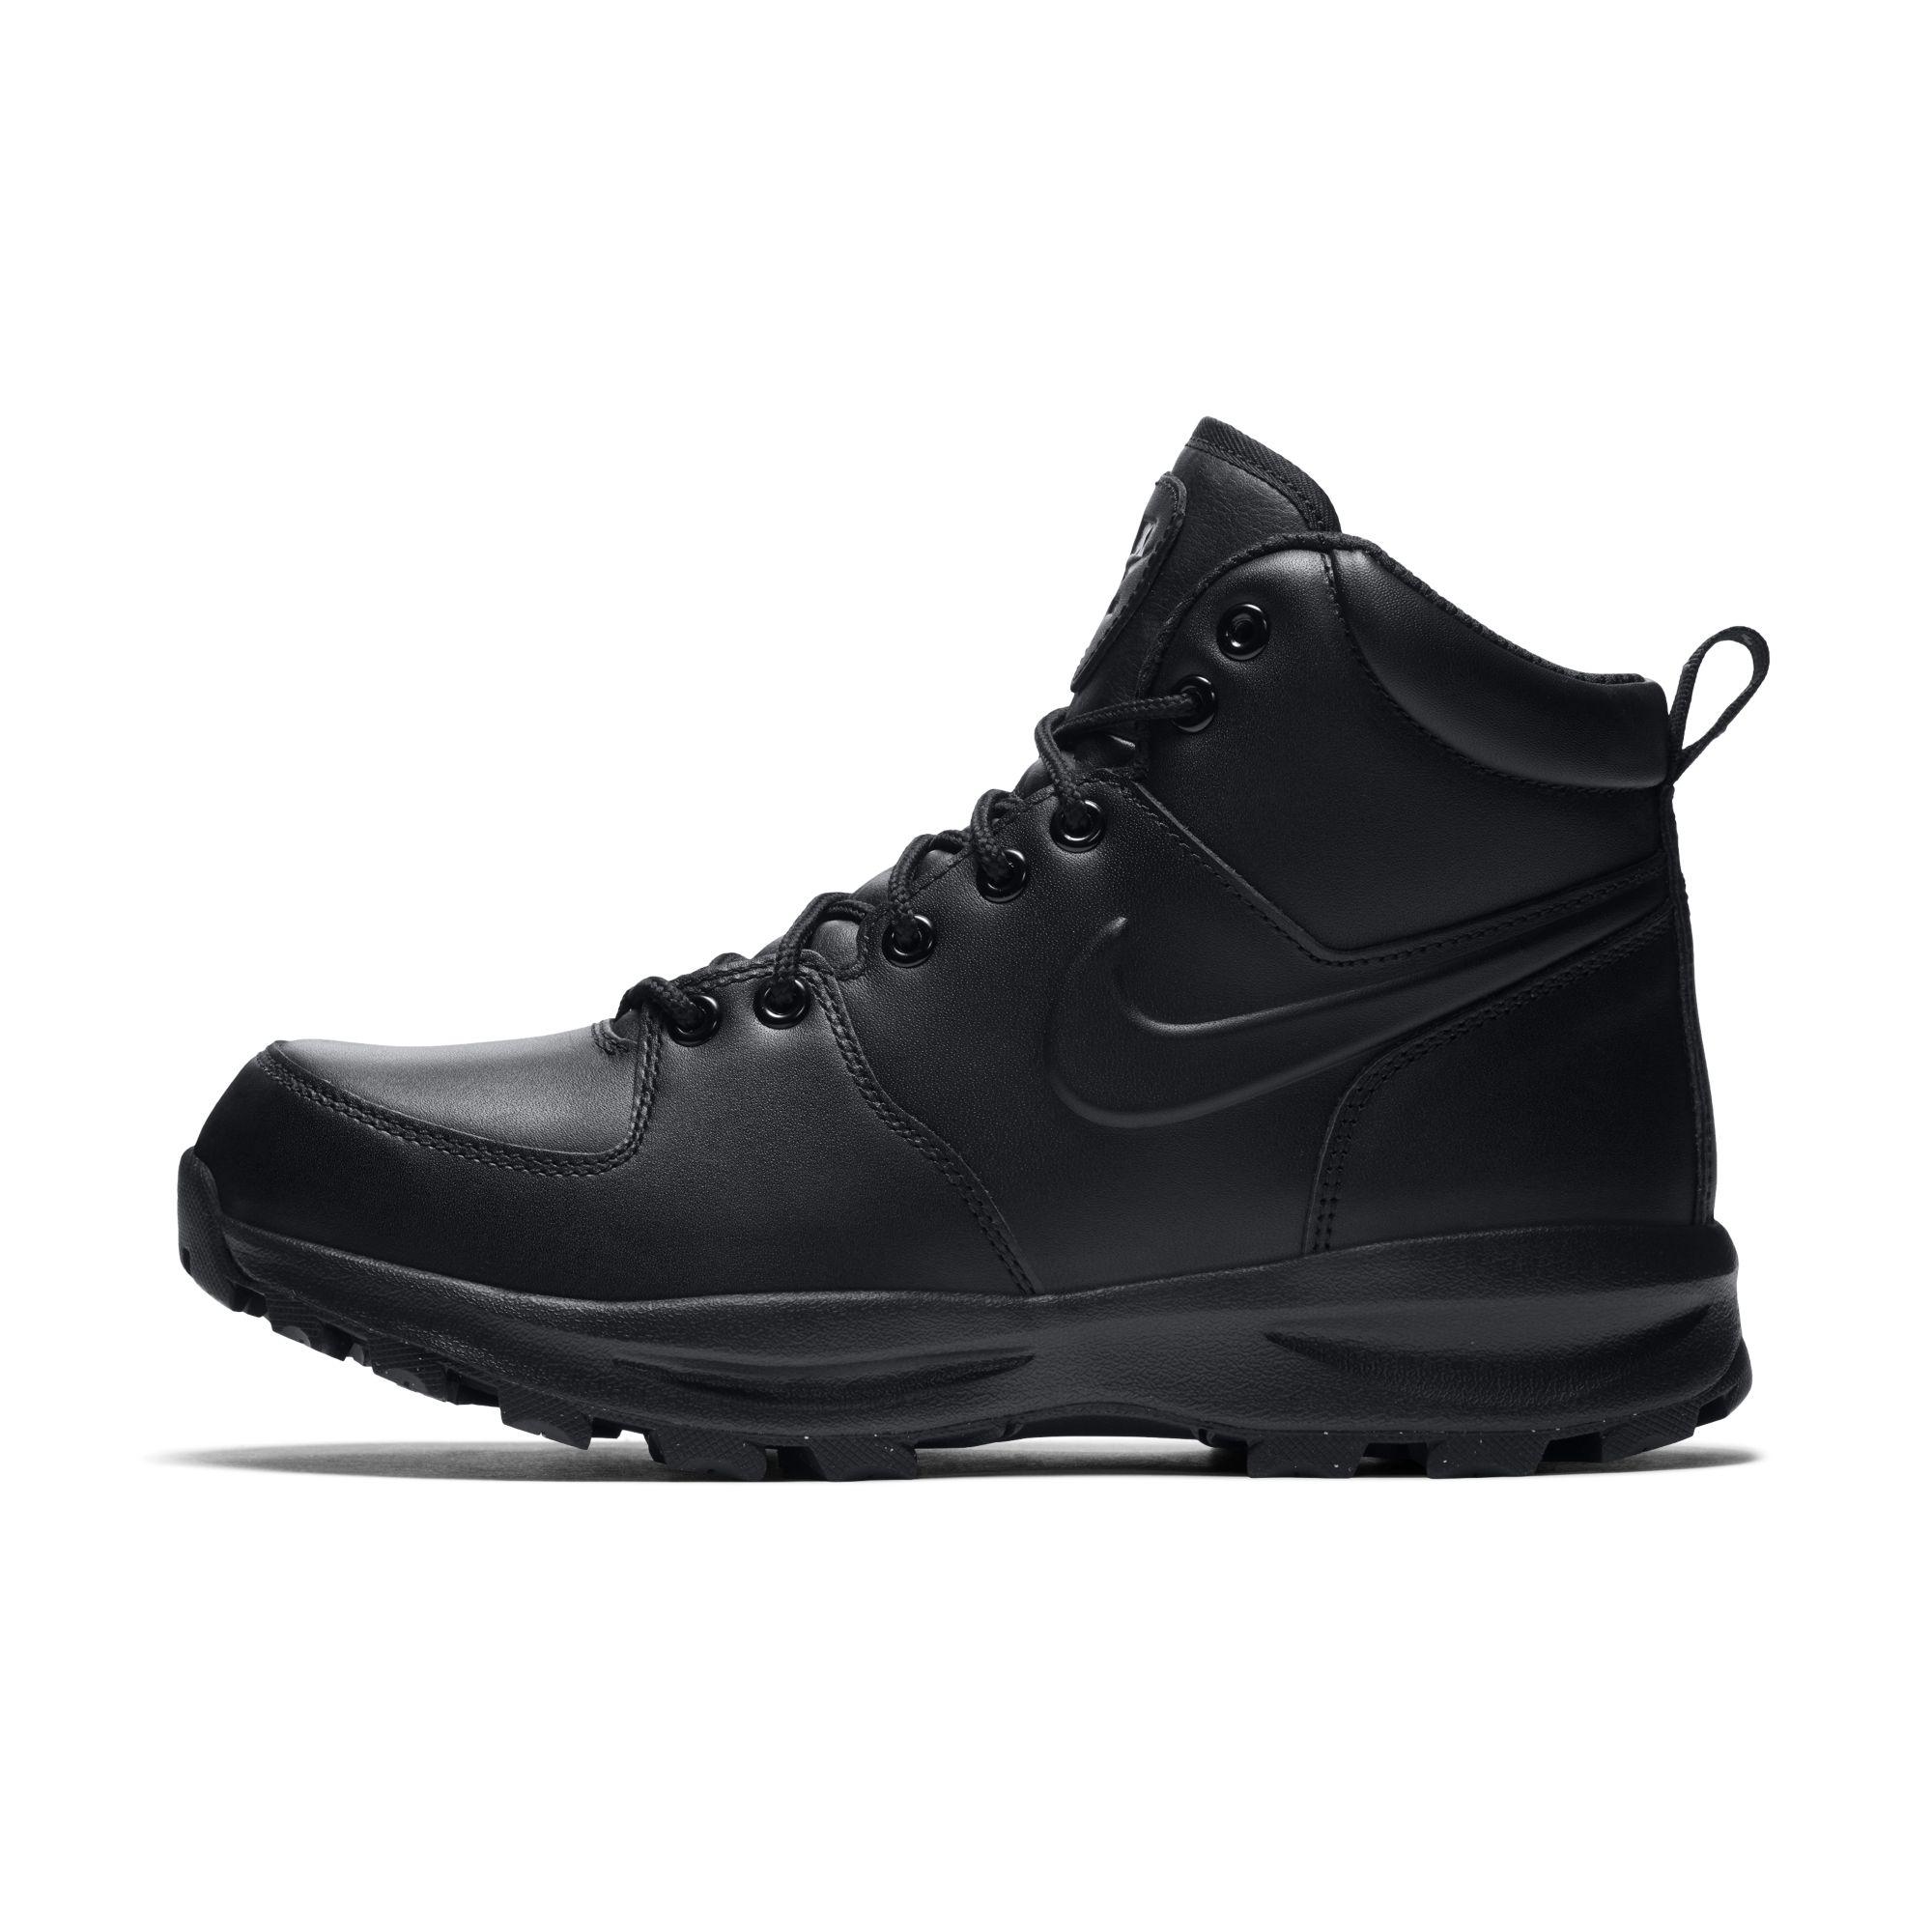 Nike Leather Manoa in Black for Men - Save 24% - Lyst